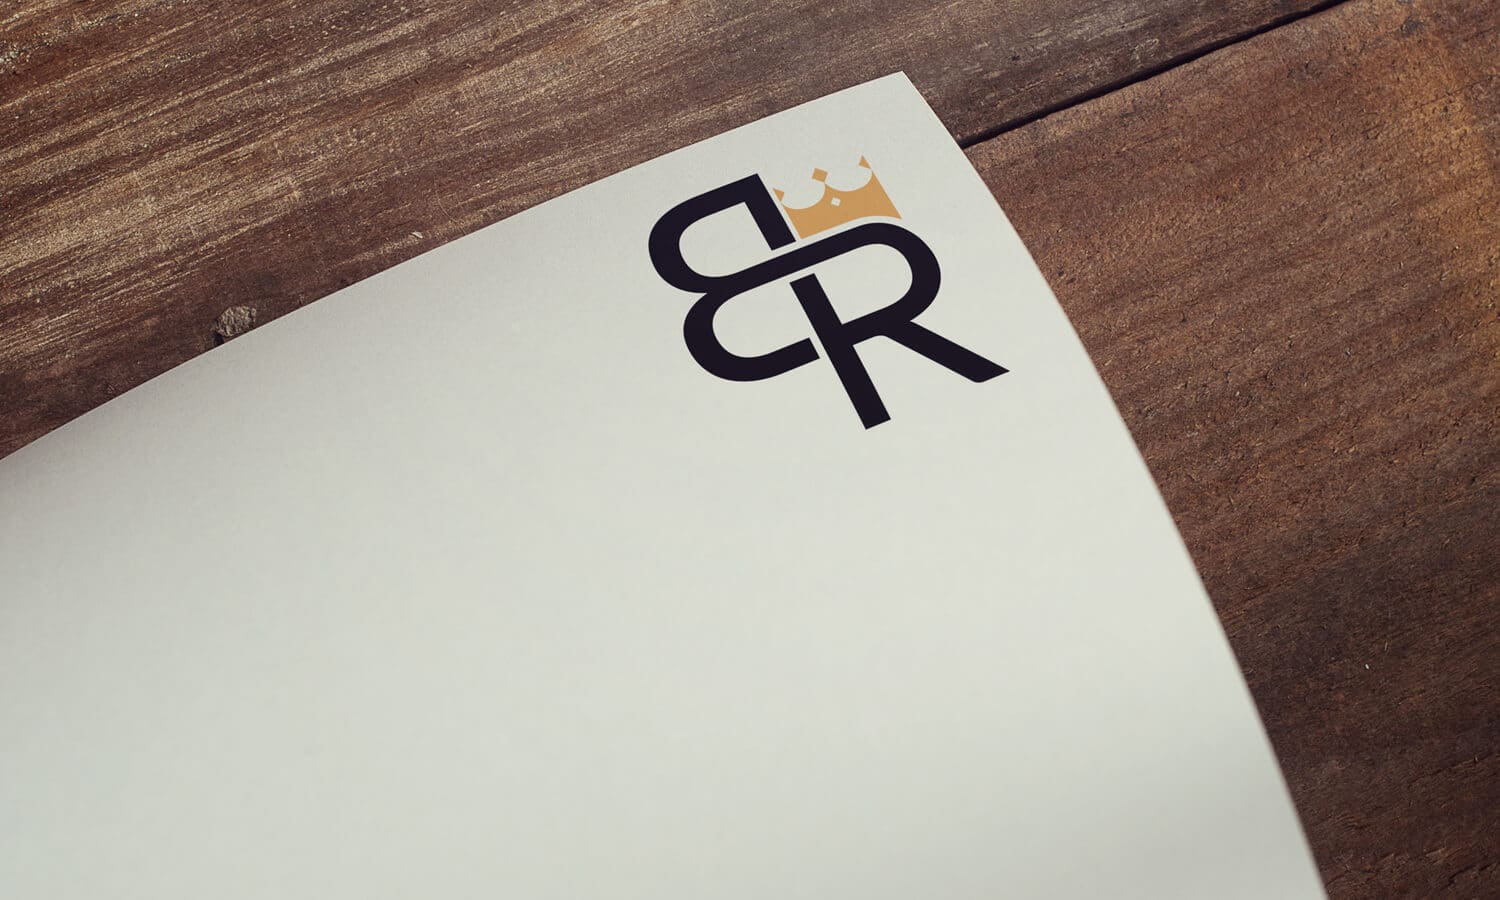 BR monogram logo with crown